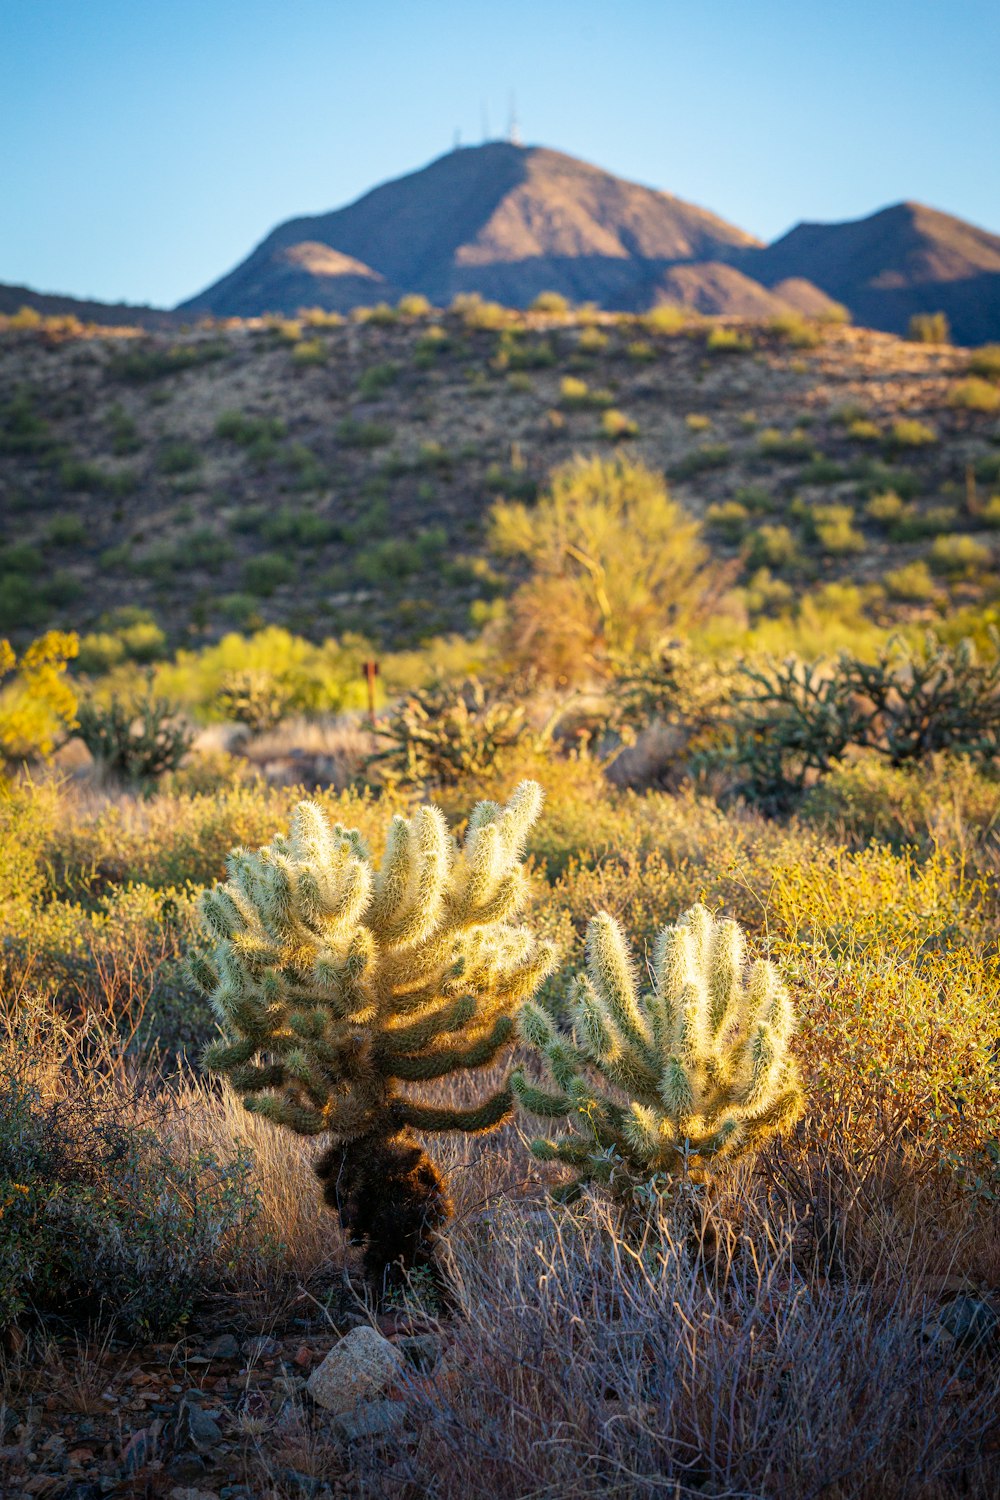 two cactus plants in a field with mountains in the background